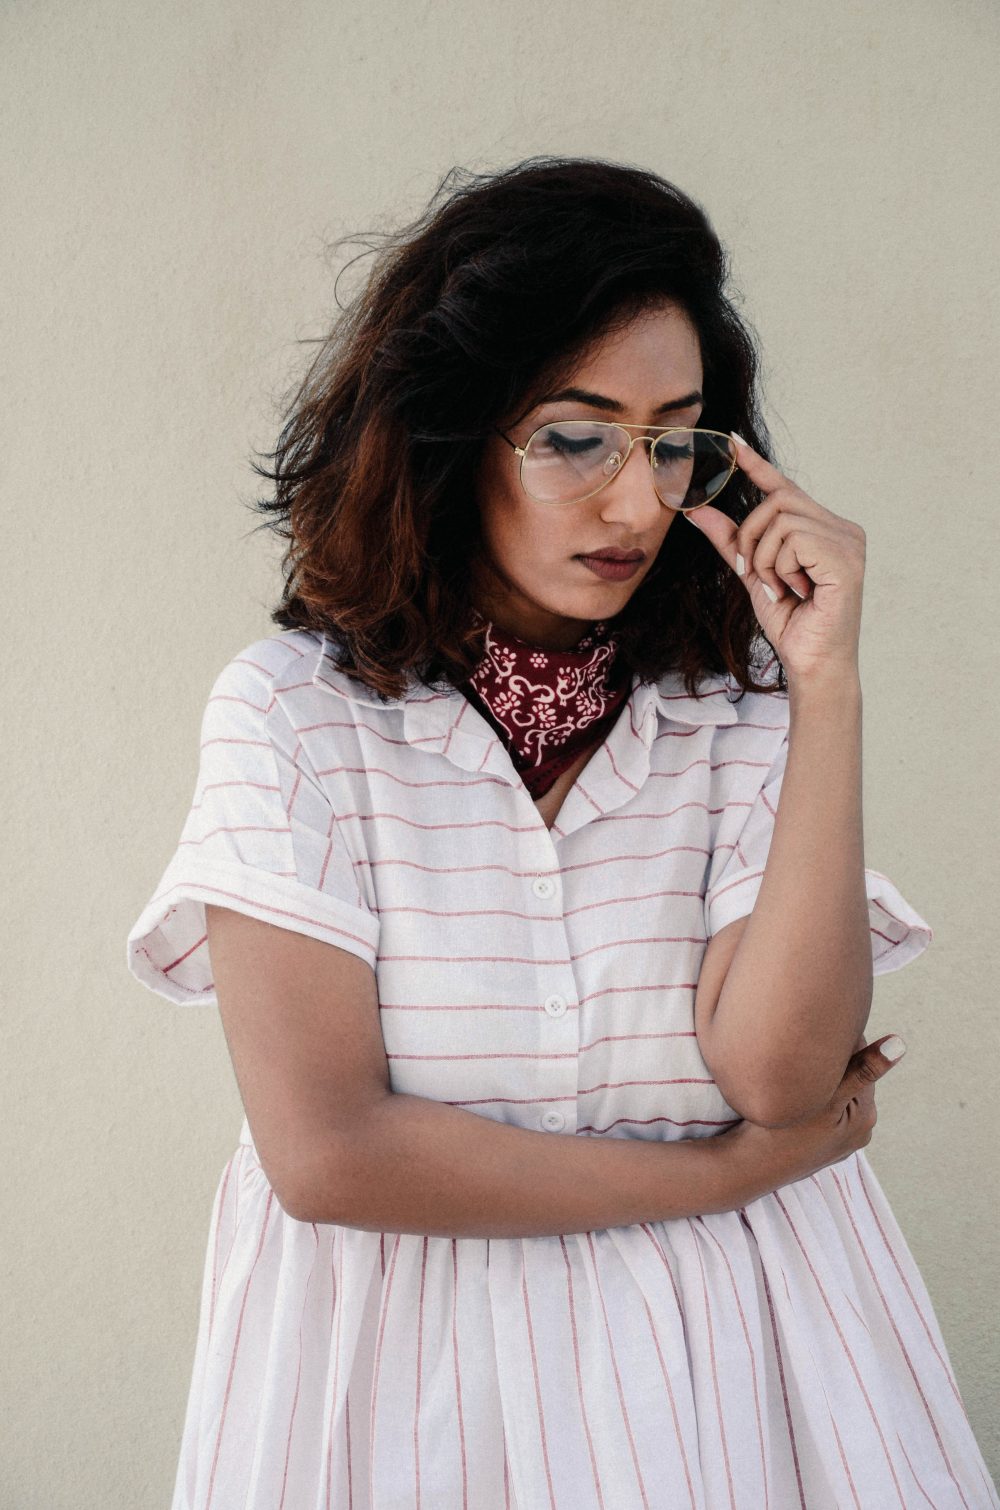 Lookbook ; Striped ; Dress ; Clear Aviators ; Outfit ; fashion photography ; Brown Lips ; New Chic ; ootd ; sneakers ; white ; street style ; neckerchief; red ; bandana ; strong ; Dark ; summer fashion ; summer outfit ; spring ; summer 17 ; Hyderabad ; Editorial ; Naznin ; Naznin Suhaer ; dusky; model ; indian blogger ; hyderabad fashion bloggers ; hyderabad bloggers ; hyderabad fashion blogger ; I Dress for the Applause ; 